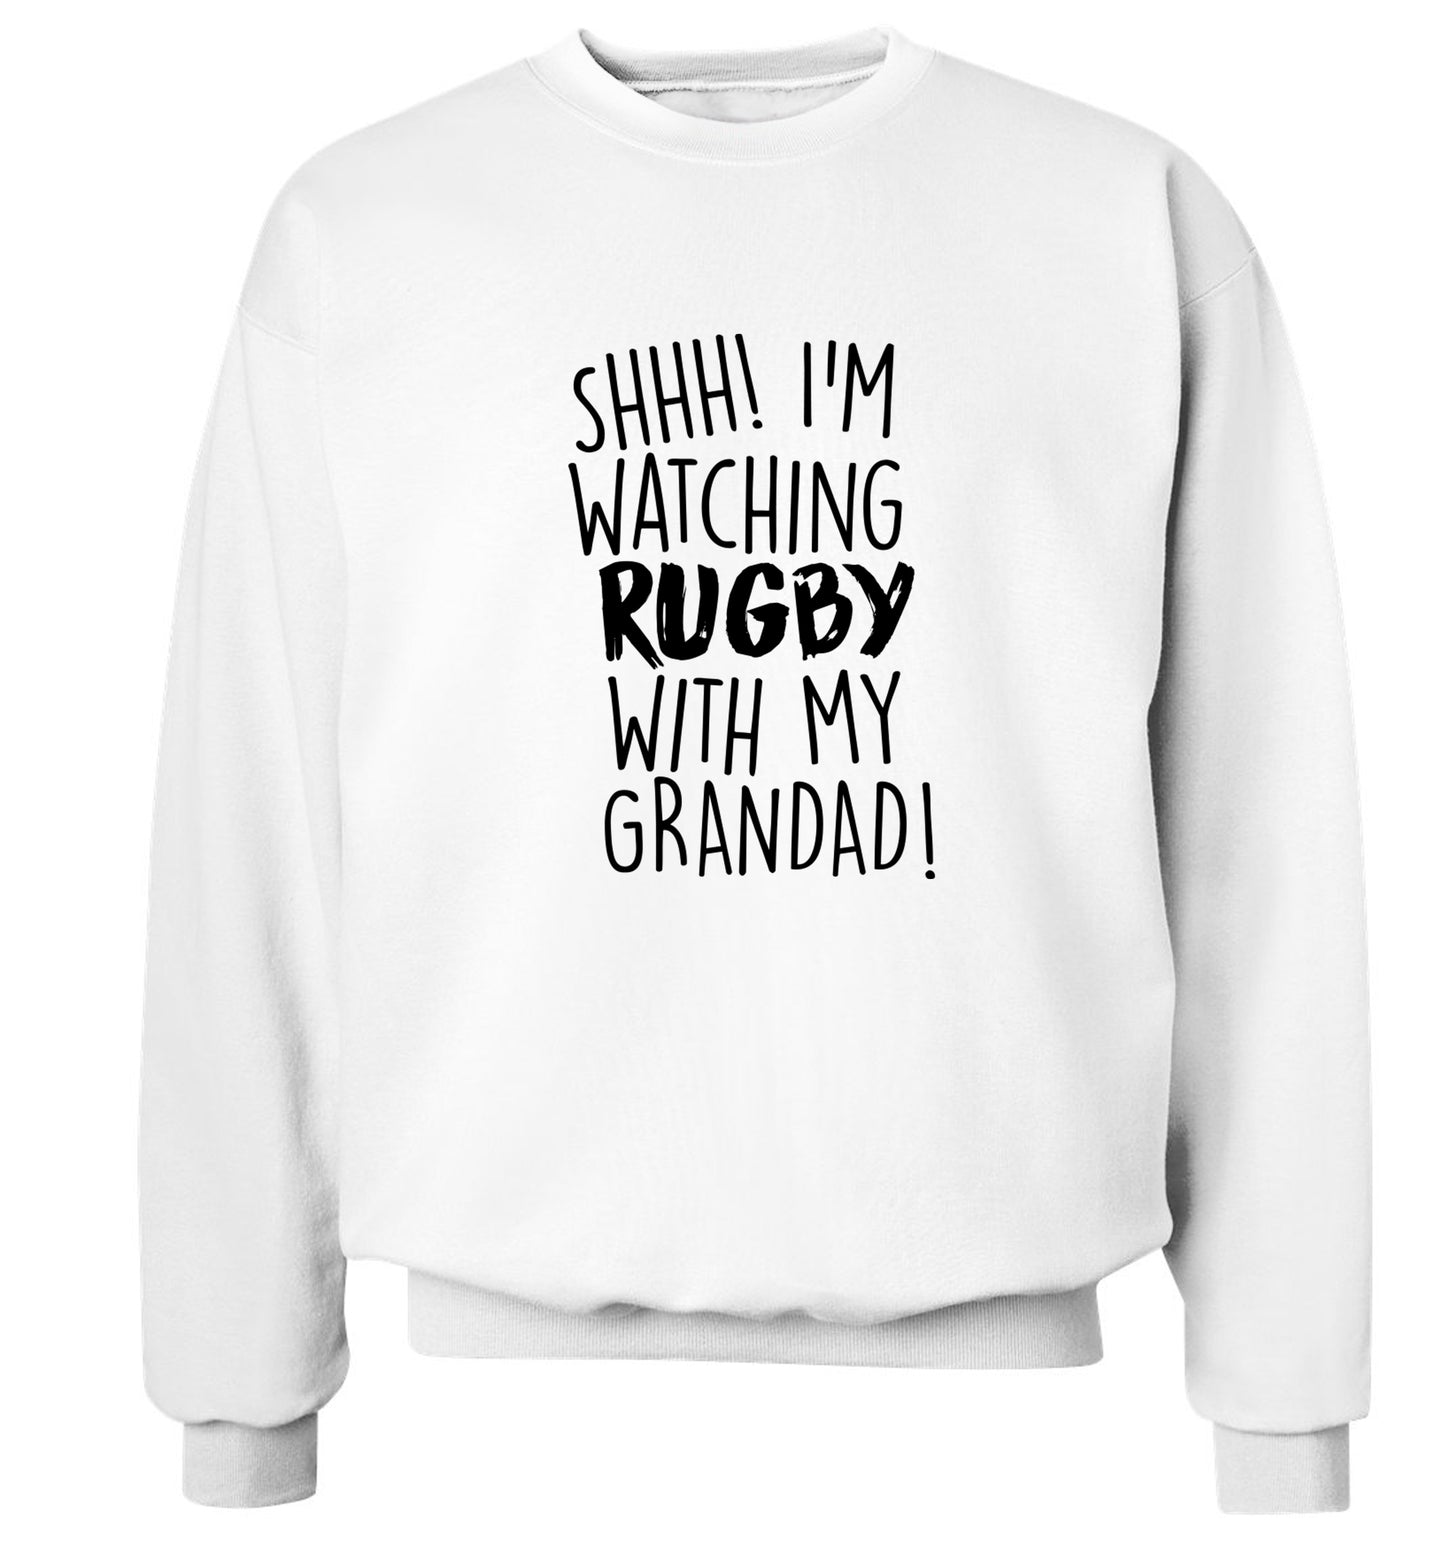 Shh I'm watching rugby with my grandad Adult's unisex white Sweater 2XL